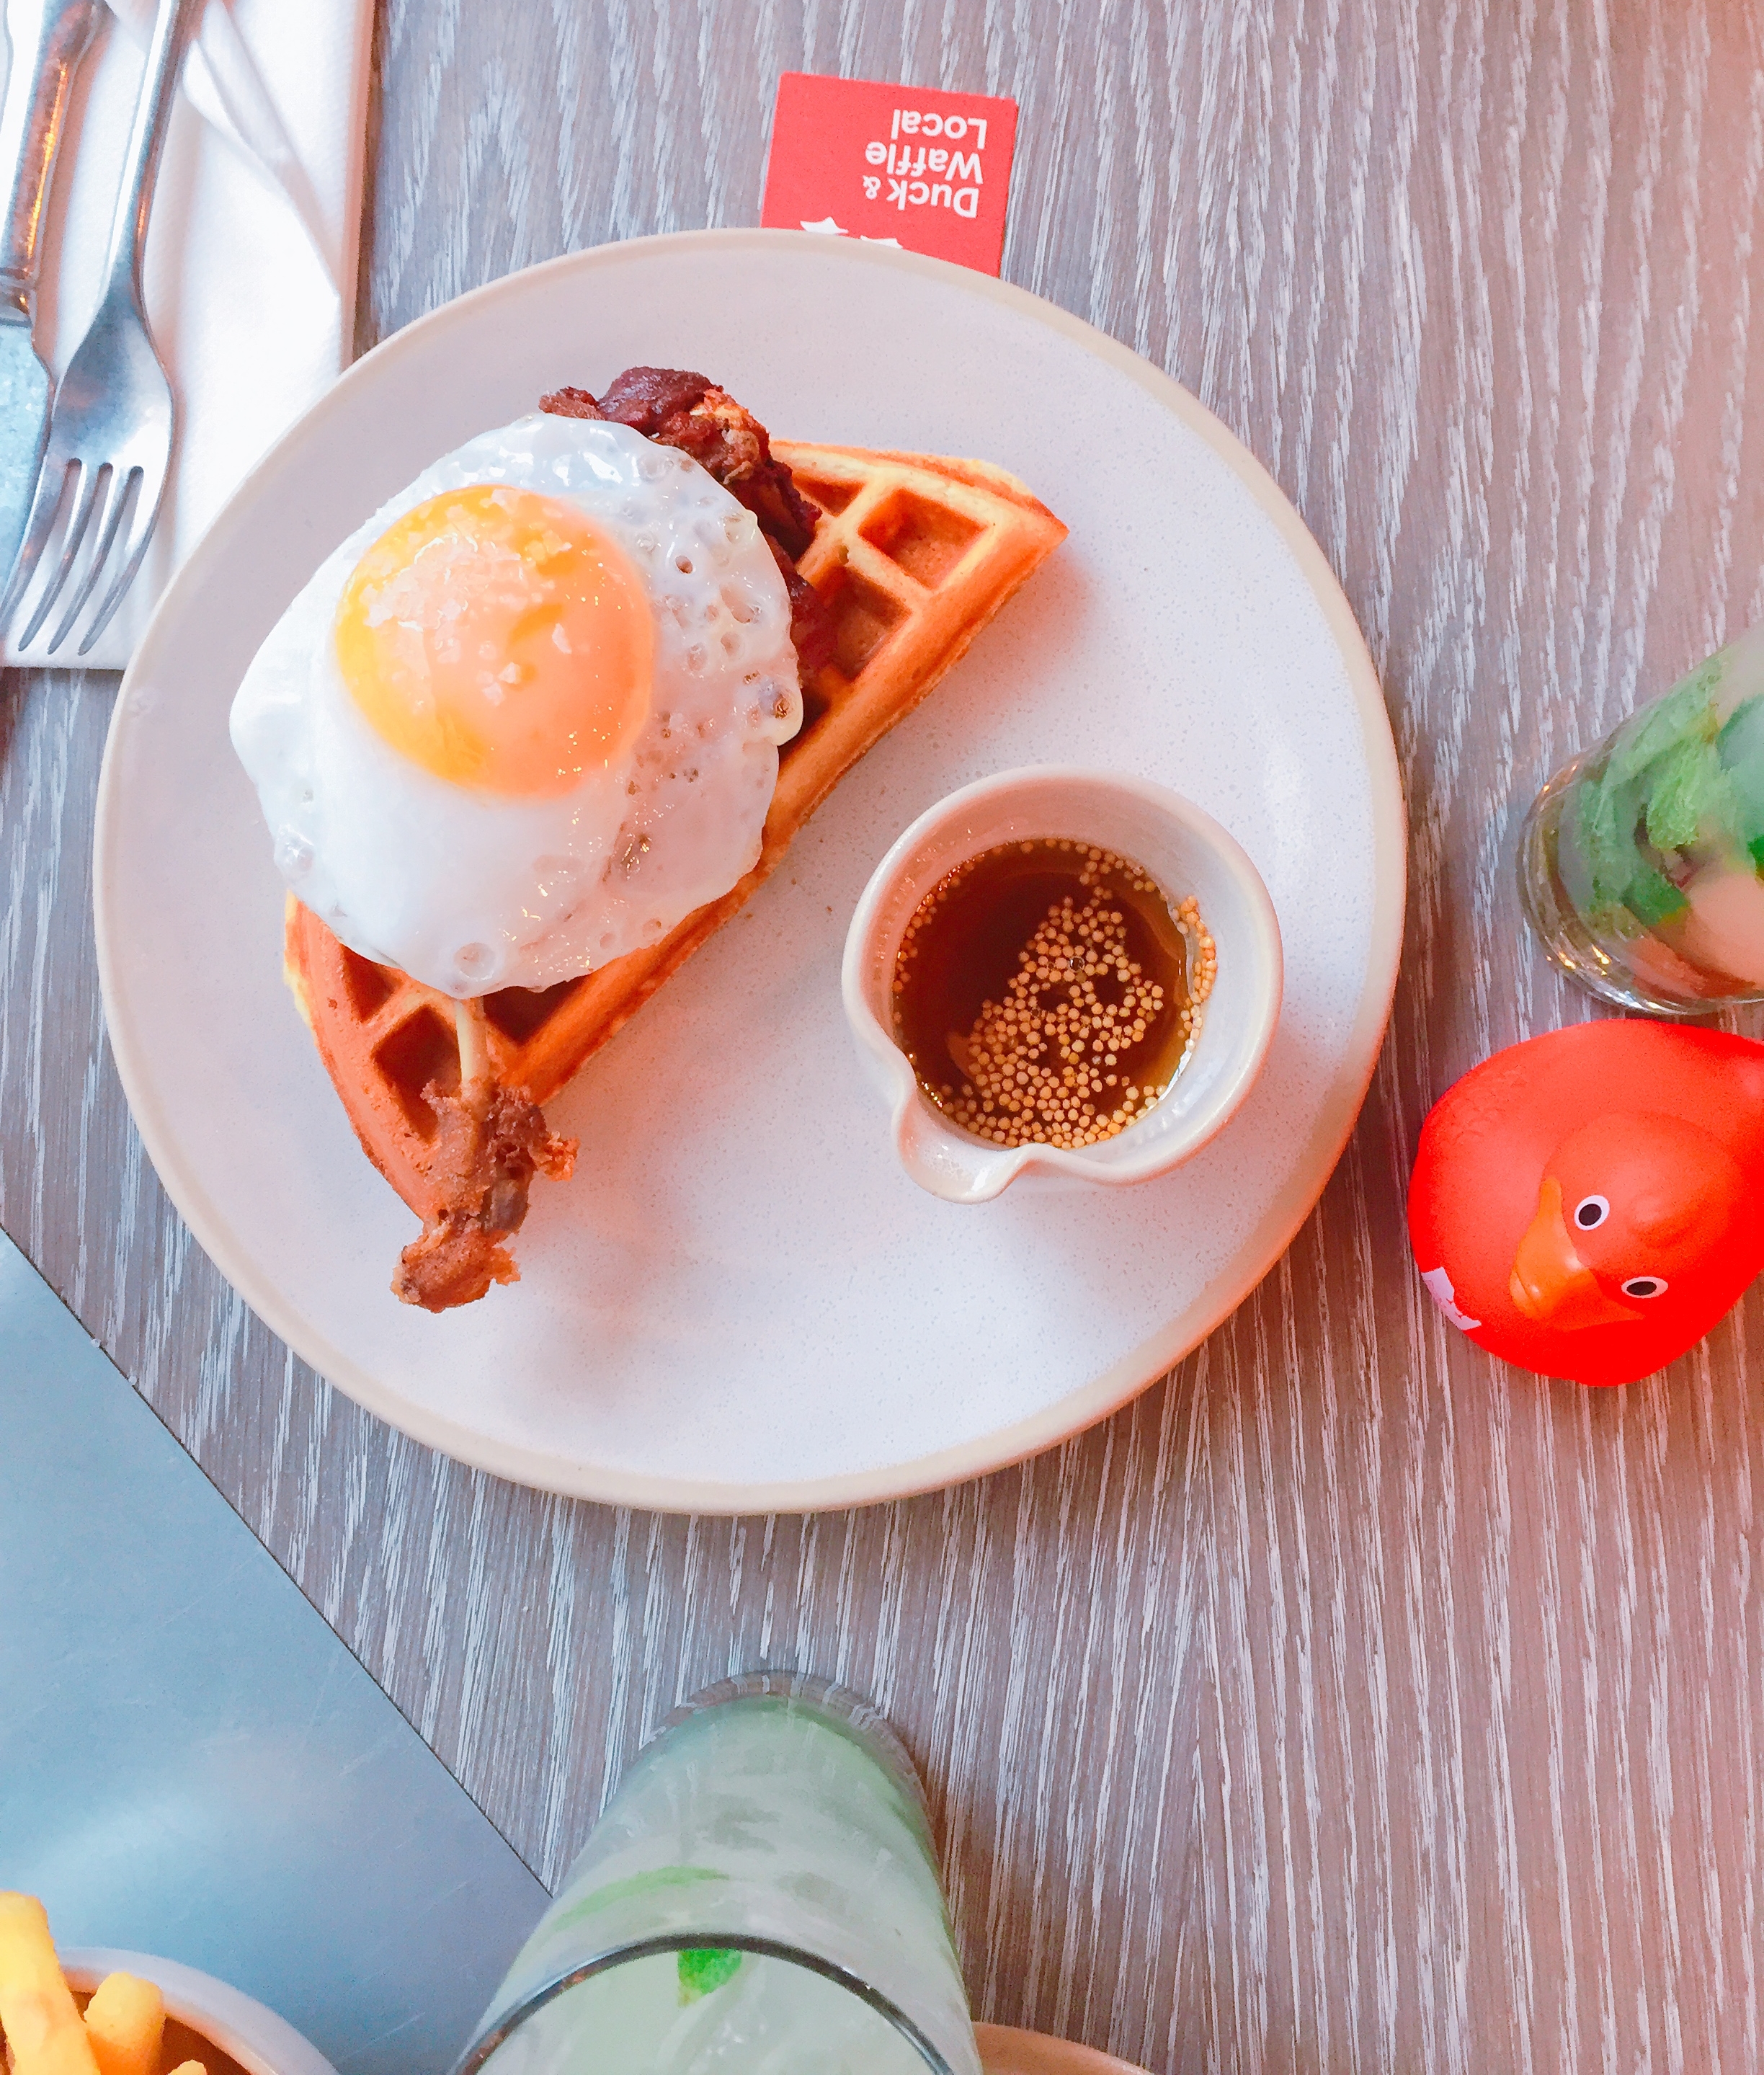 Duck and waffle local review 